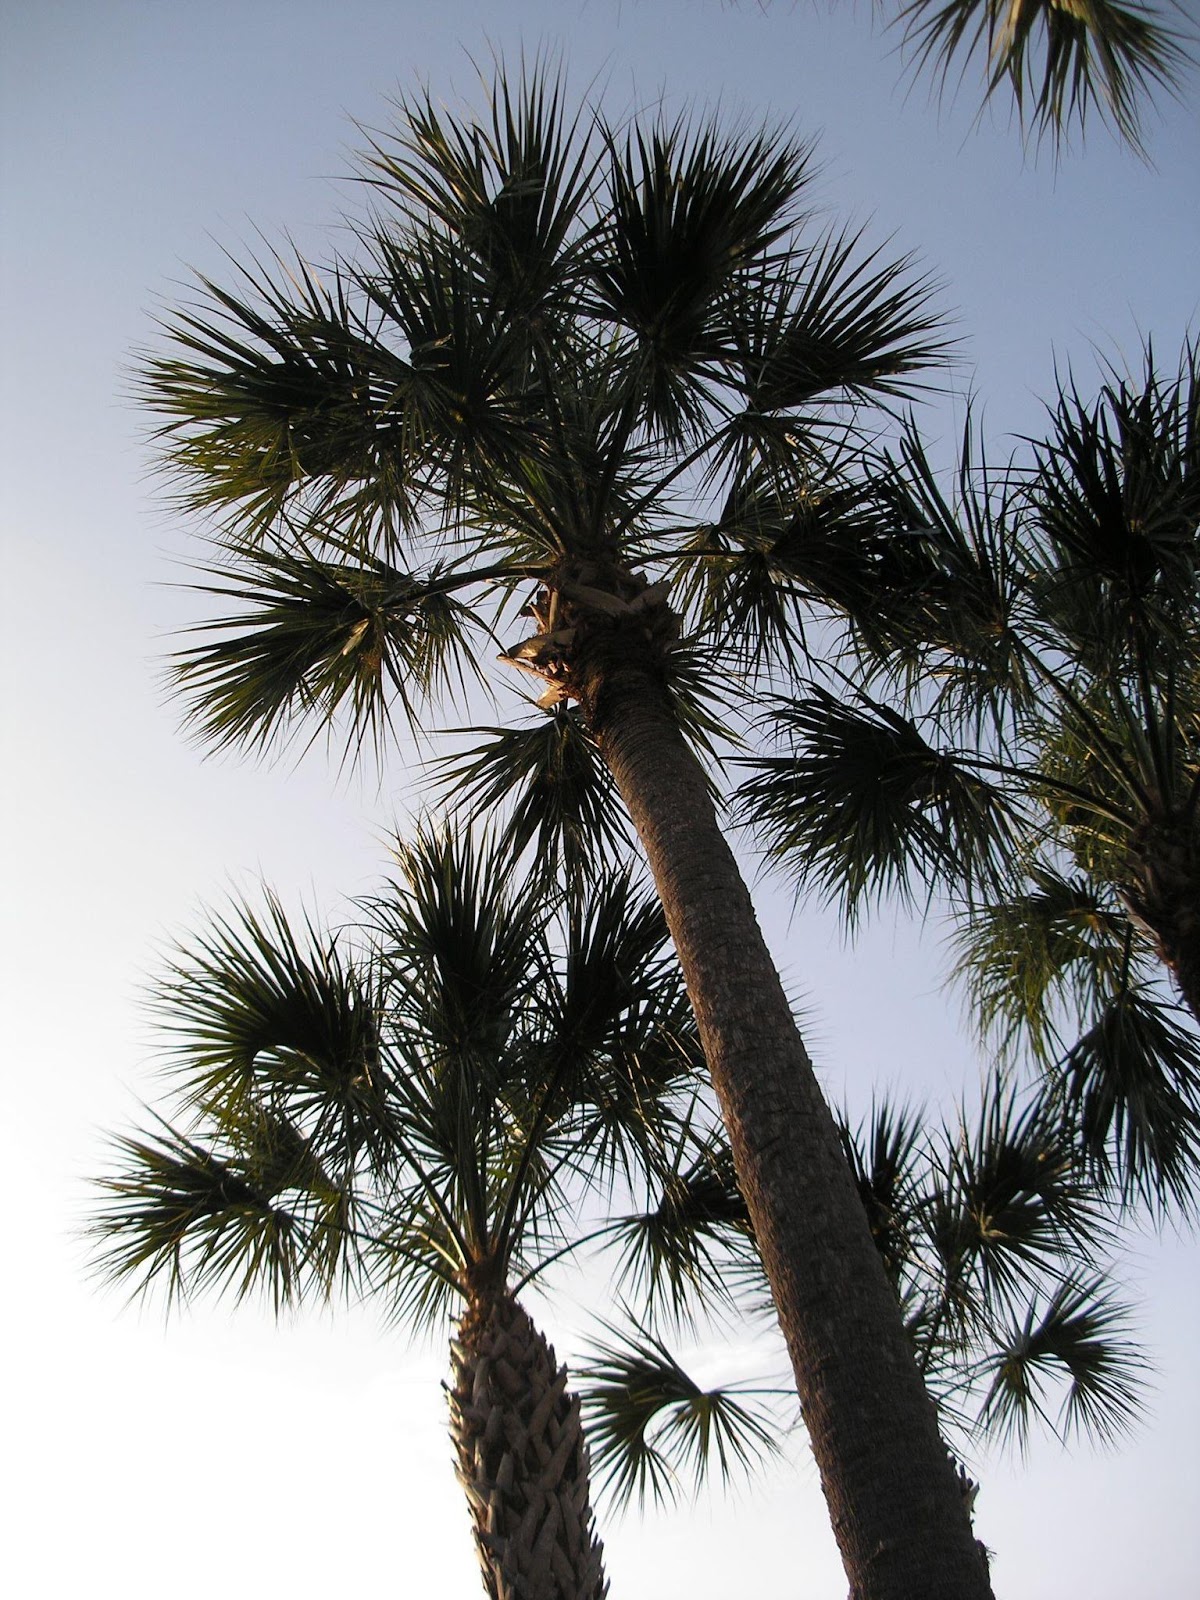 15 Palm Trees in Georgia and Atlanta Area (With Pictures)